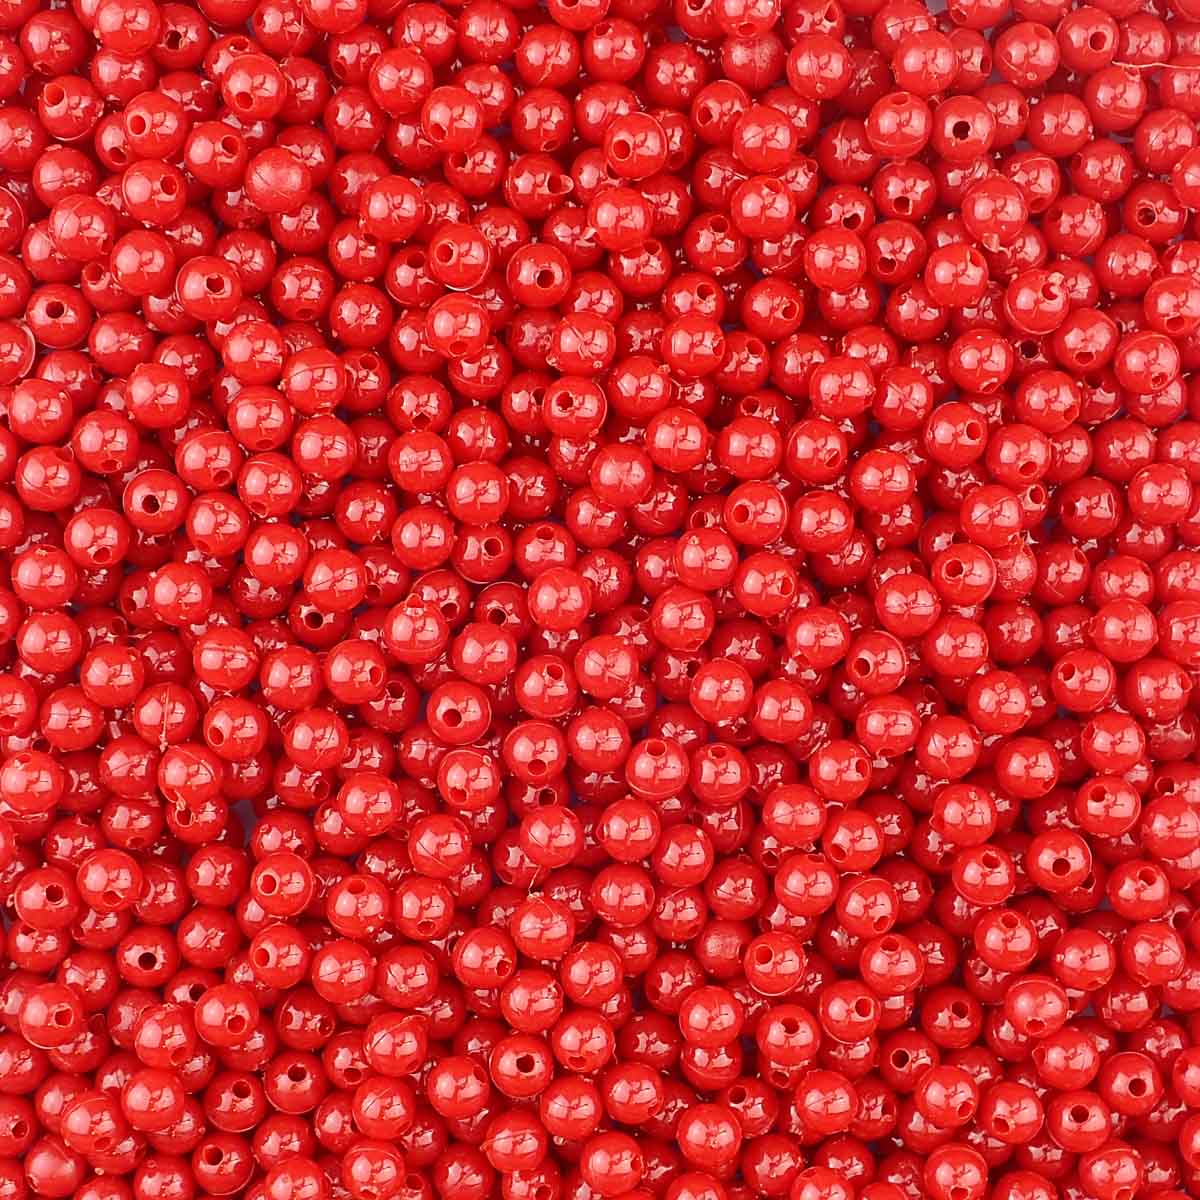 6mm Round Plastic Craft Beads, Red Opaque, 500 beads